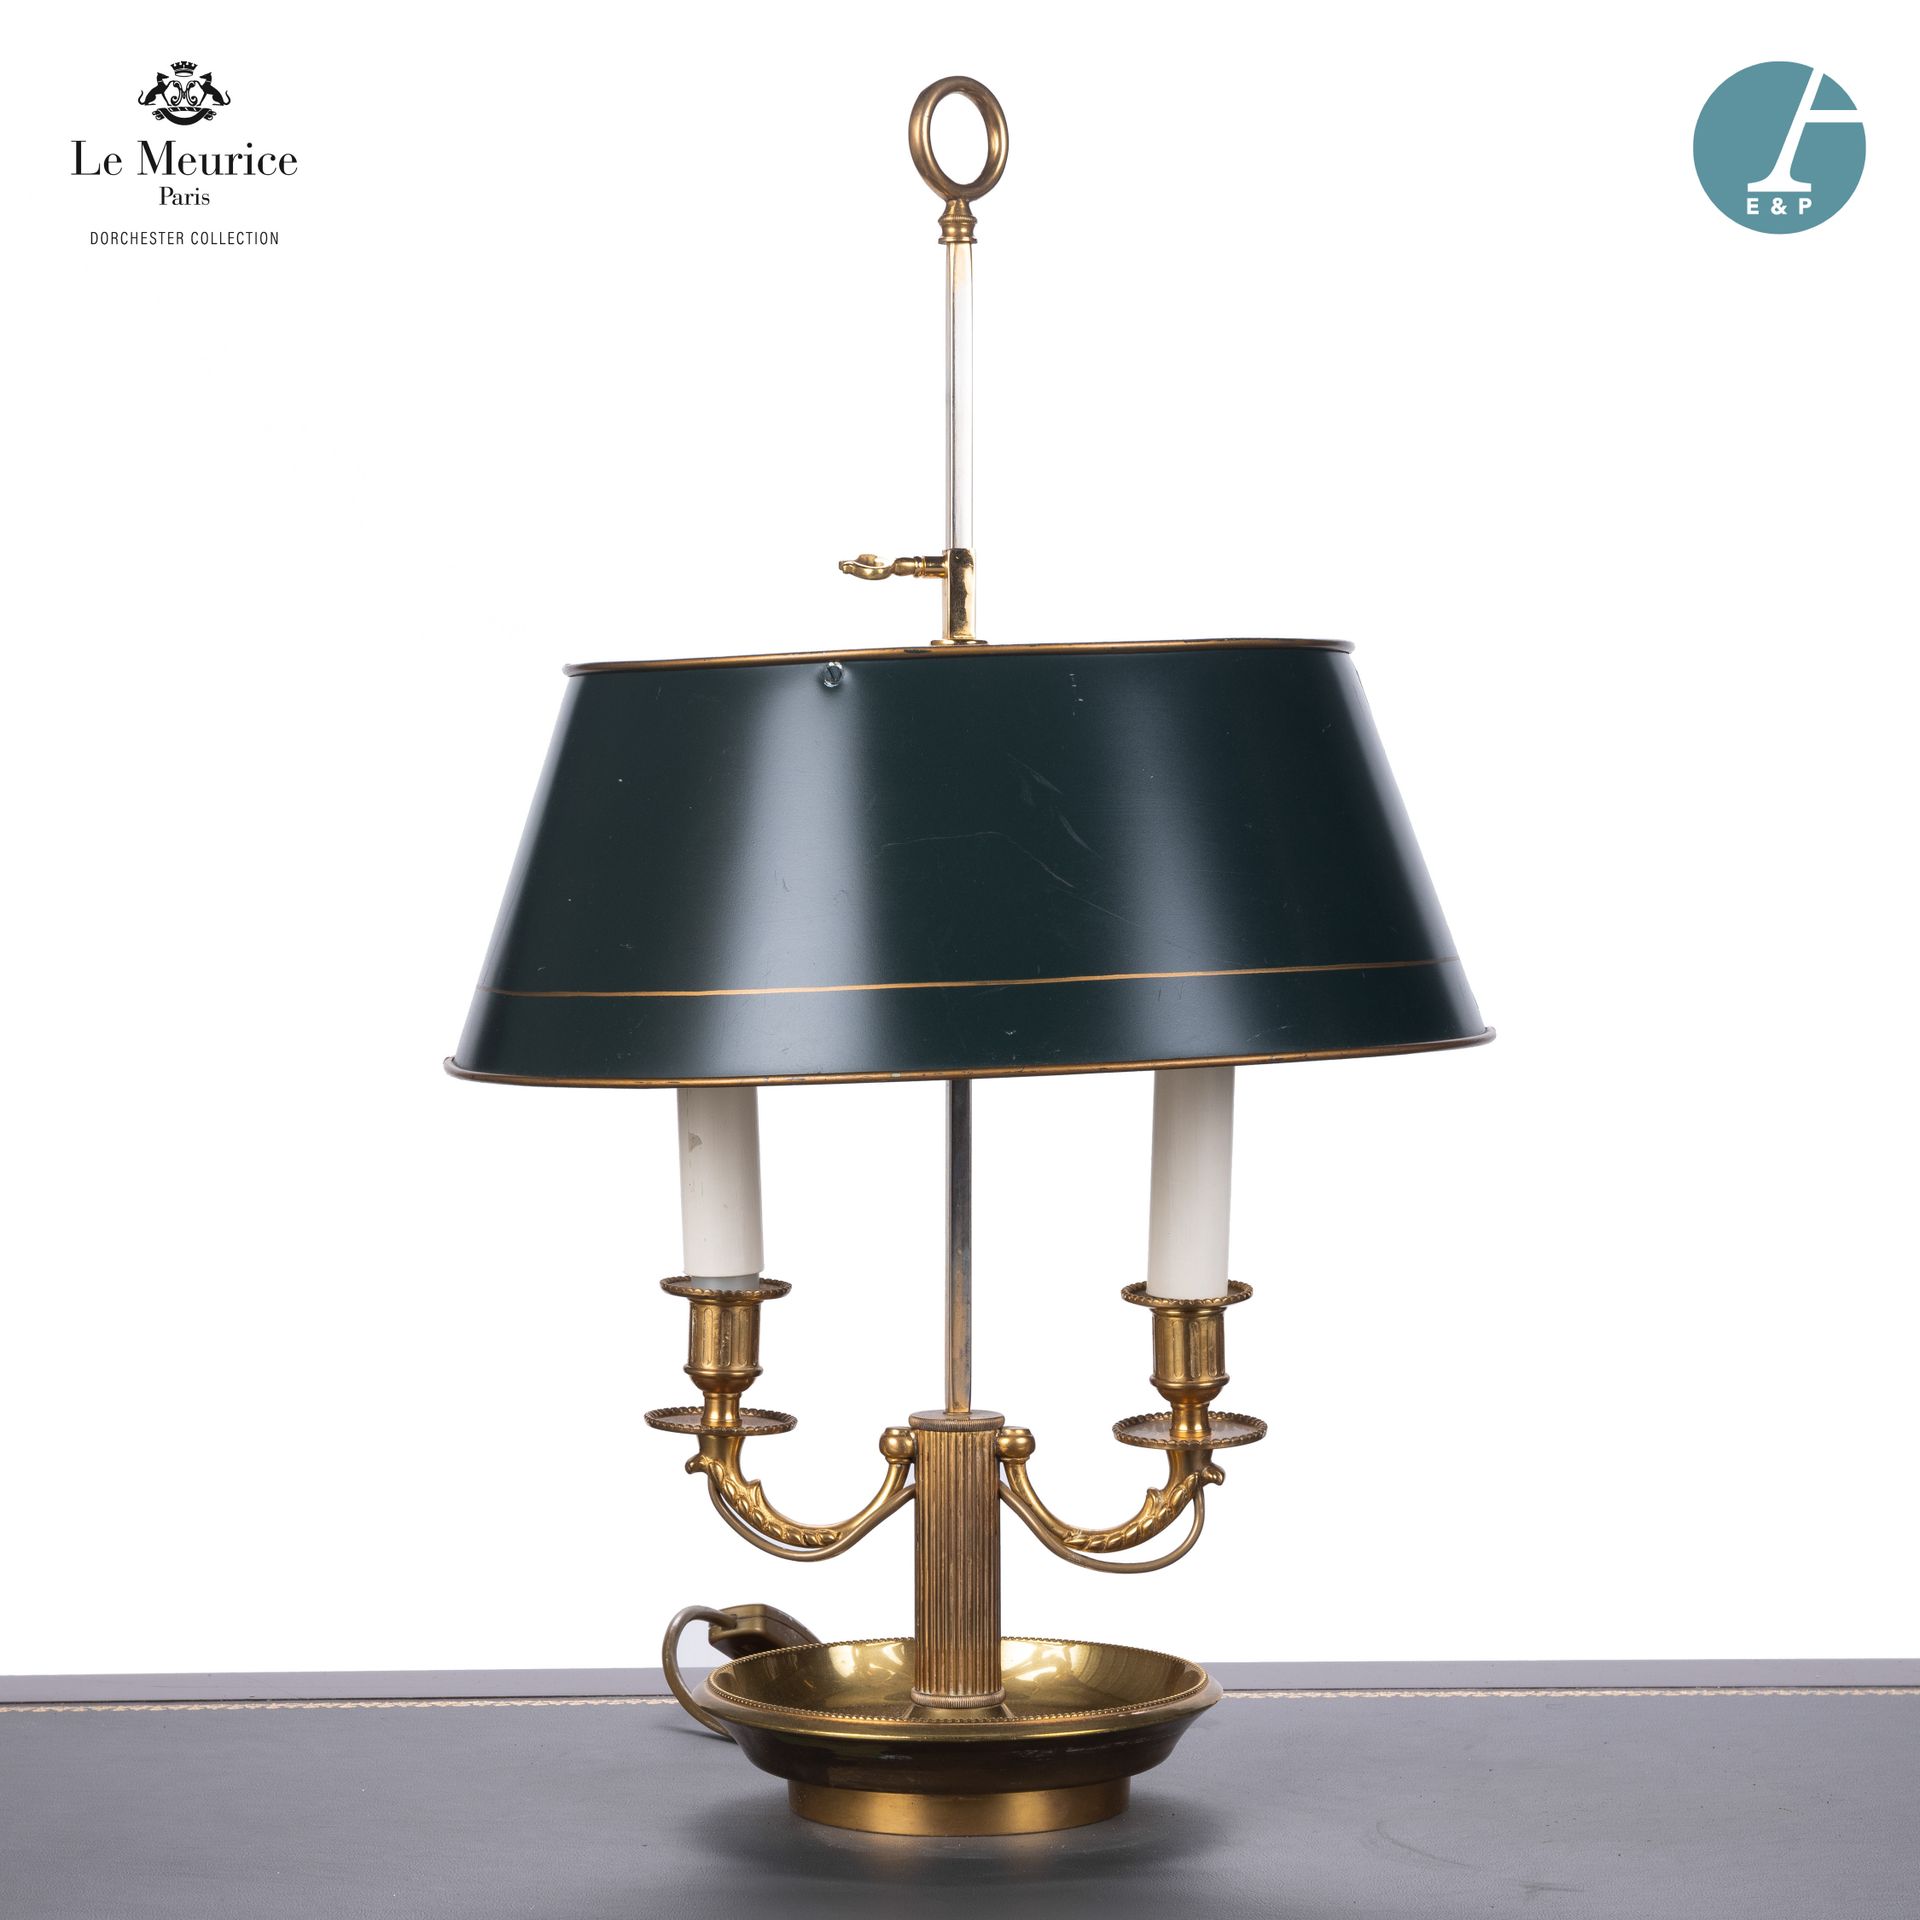 Null From Hôtel Le Meurice.
Gilded metal bouillotte lamp with two light arms, fl&hellip;